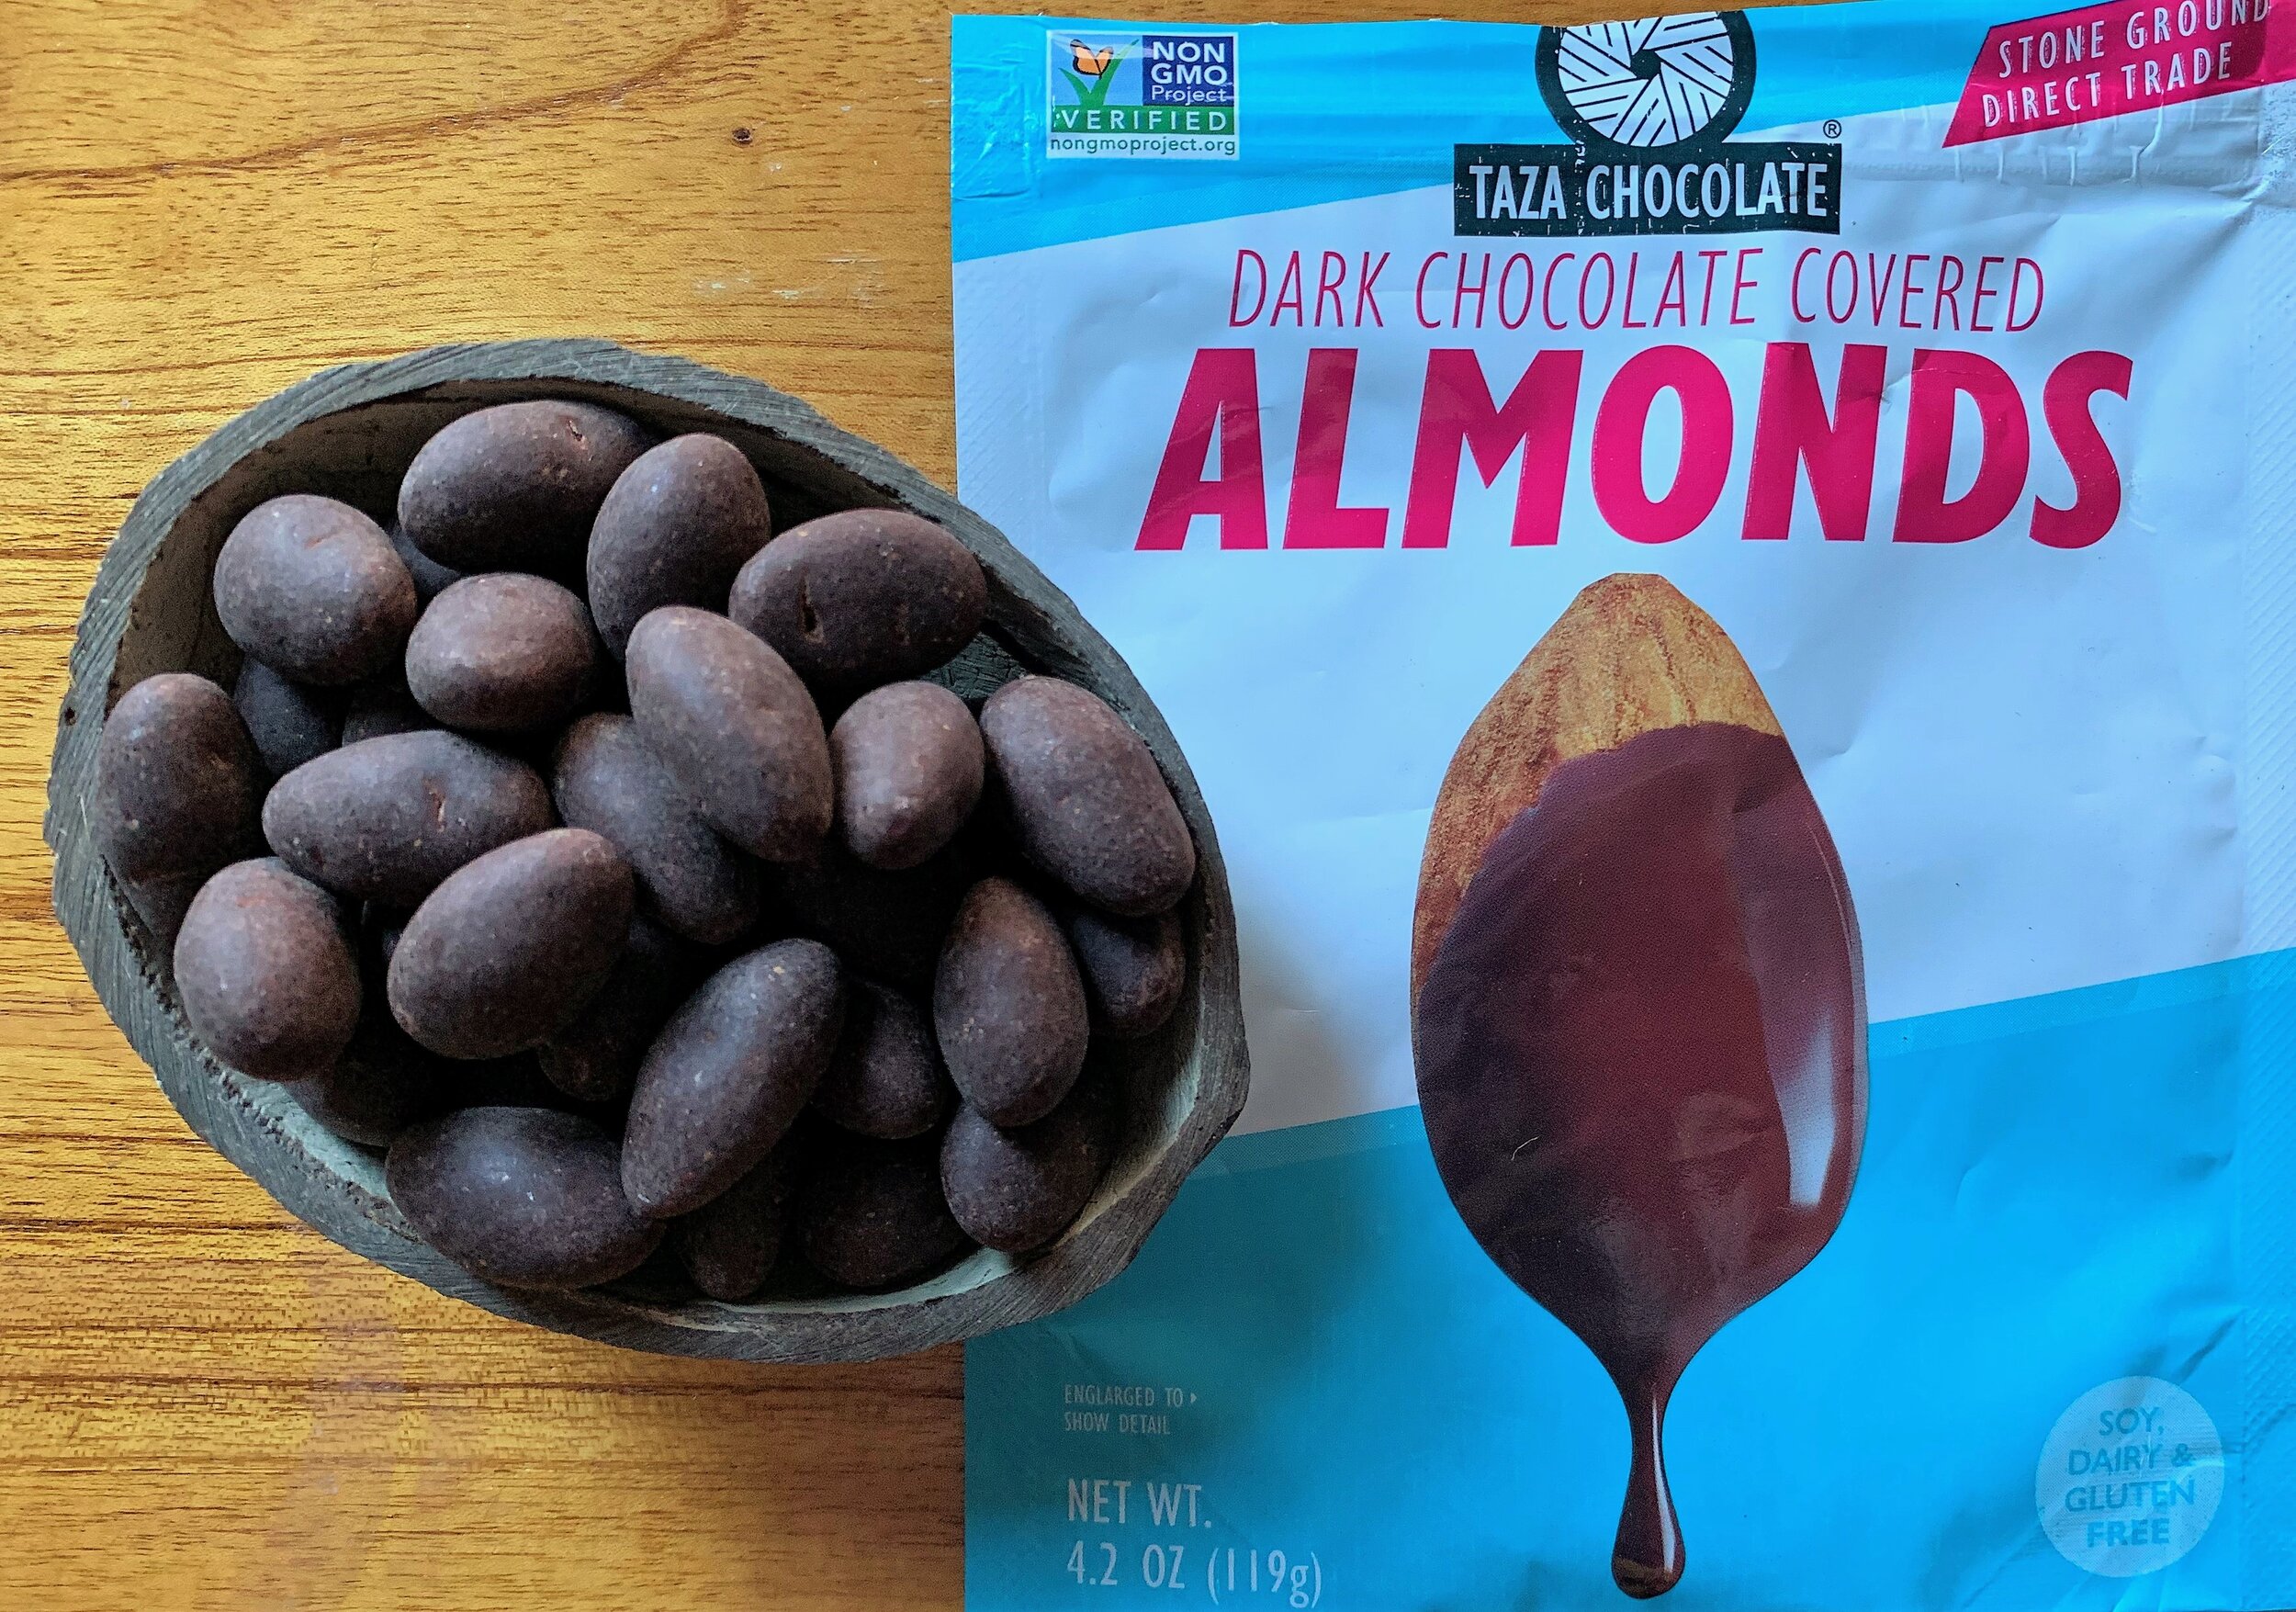 Chocolate covered almonds from Taza Chocolate